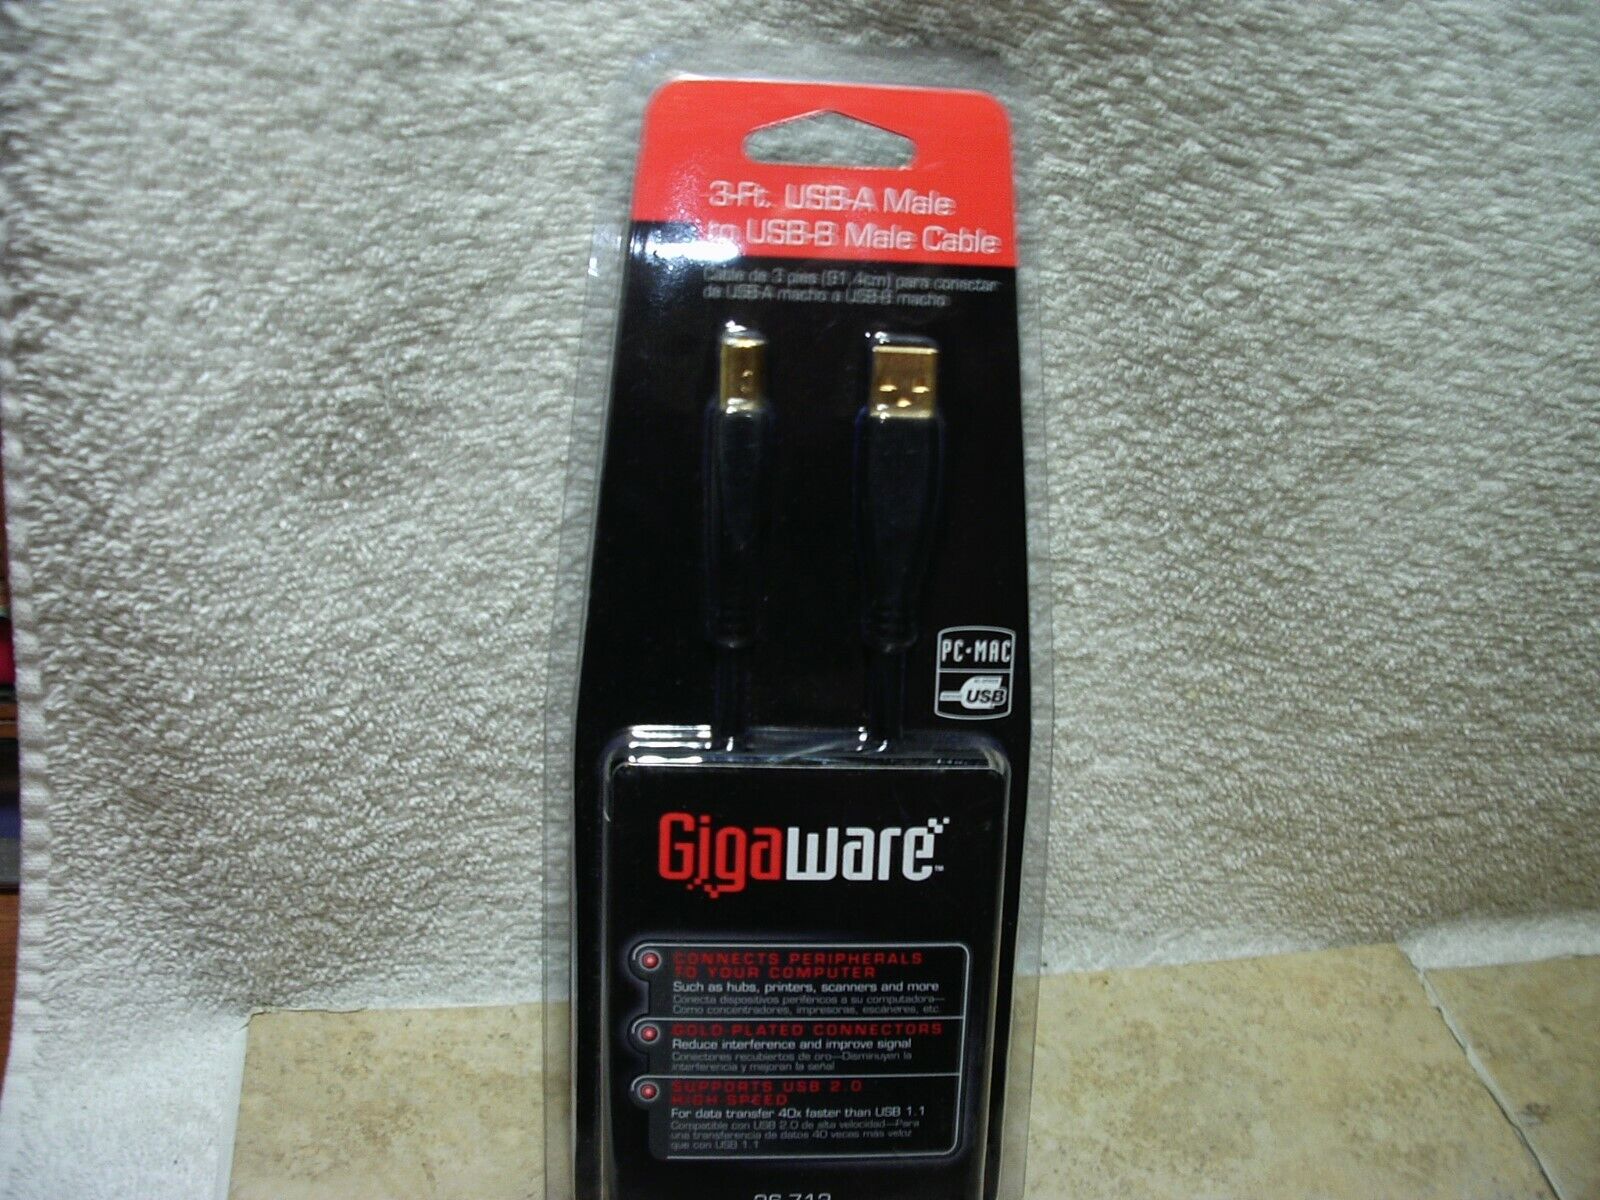 GIGAWARE 3 FT USB 3.0 CABLE PC-MAC GOLD PLATED BNIP USB-A MALE TO USB-B MALE